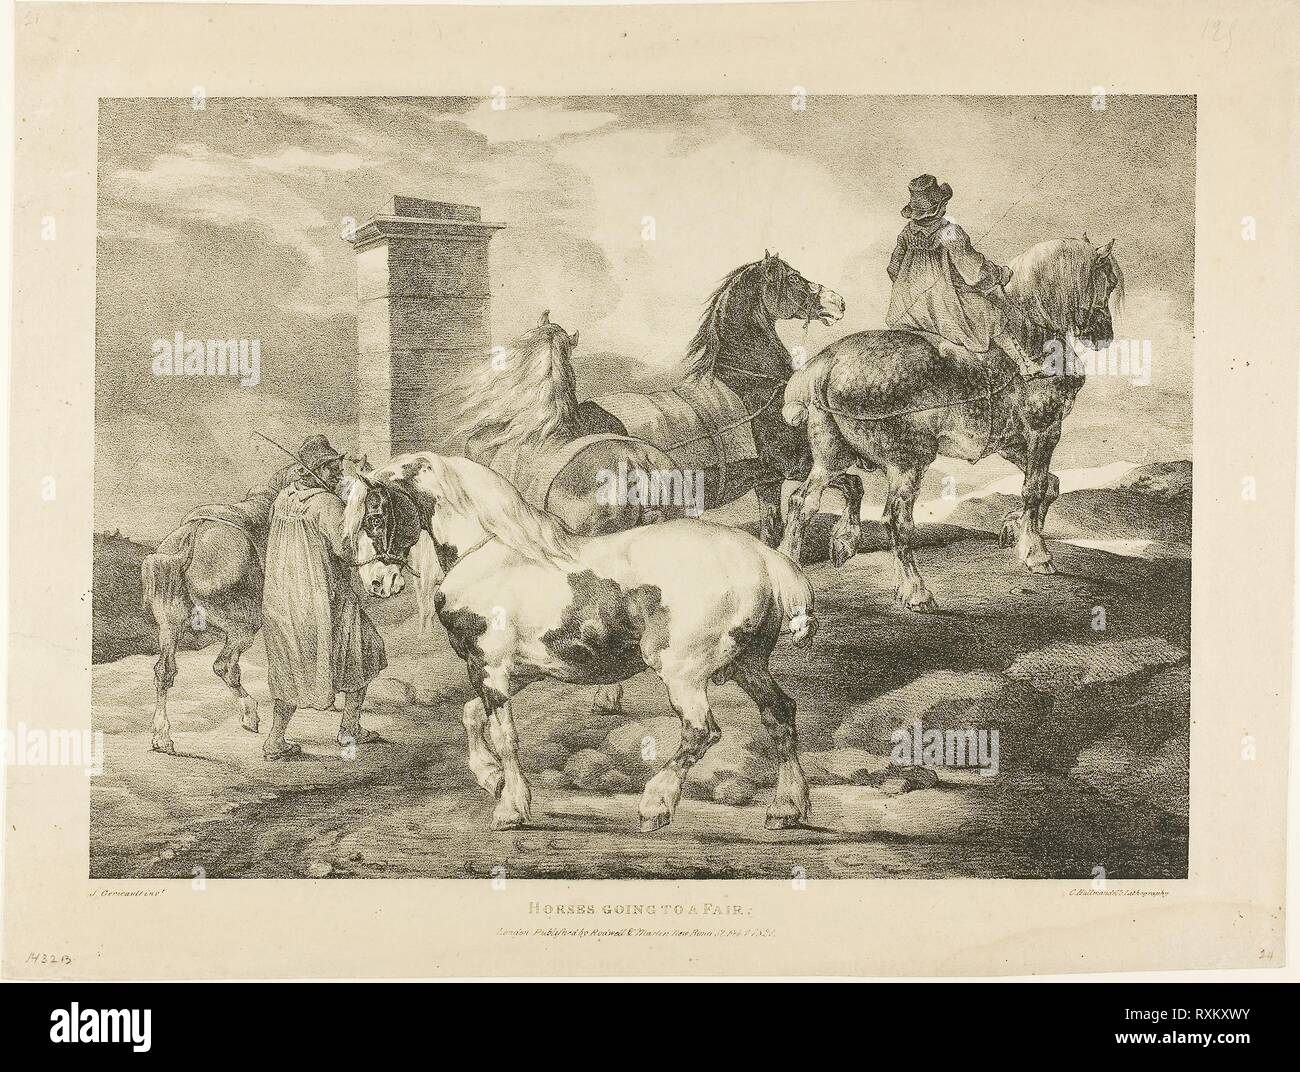 Horses Going to a Fair, plate 3 from Various Subjects Drawn from Life on Stone. Jean Louis André Théodore Géricault (French, 1791-1824); printed by Charles Joseph Hullmandel (German and English, 1789-1850); published by Rodwell and Martin. Date: 1821. Dimensions: 254 × 356 mm (image); 318 × 418 mm (sheet). Lithograph in black on buff wove paper. Origin: France. Museum: The Chicago Art Institute. Stock Photo